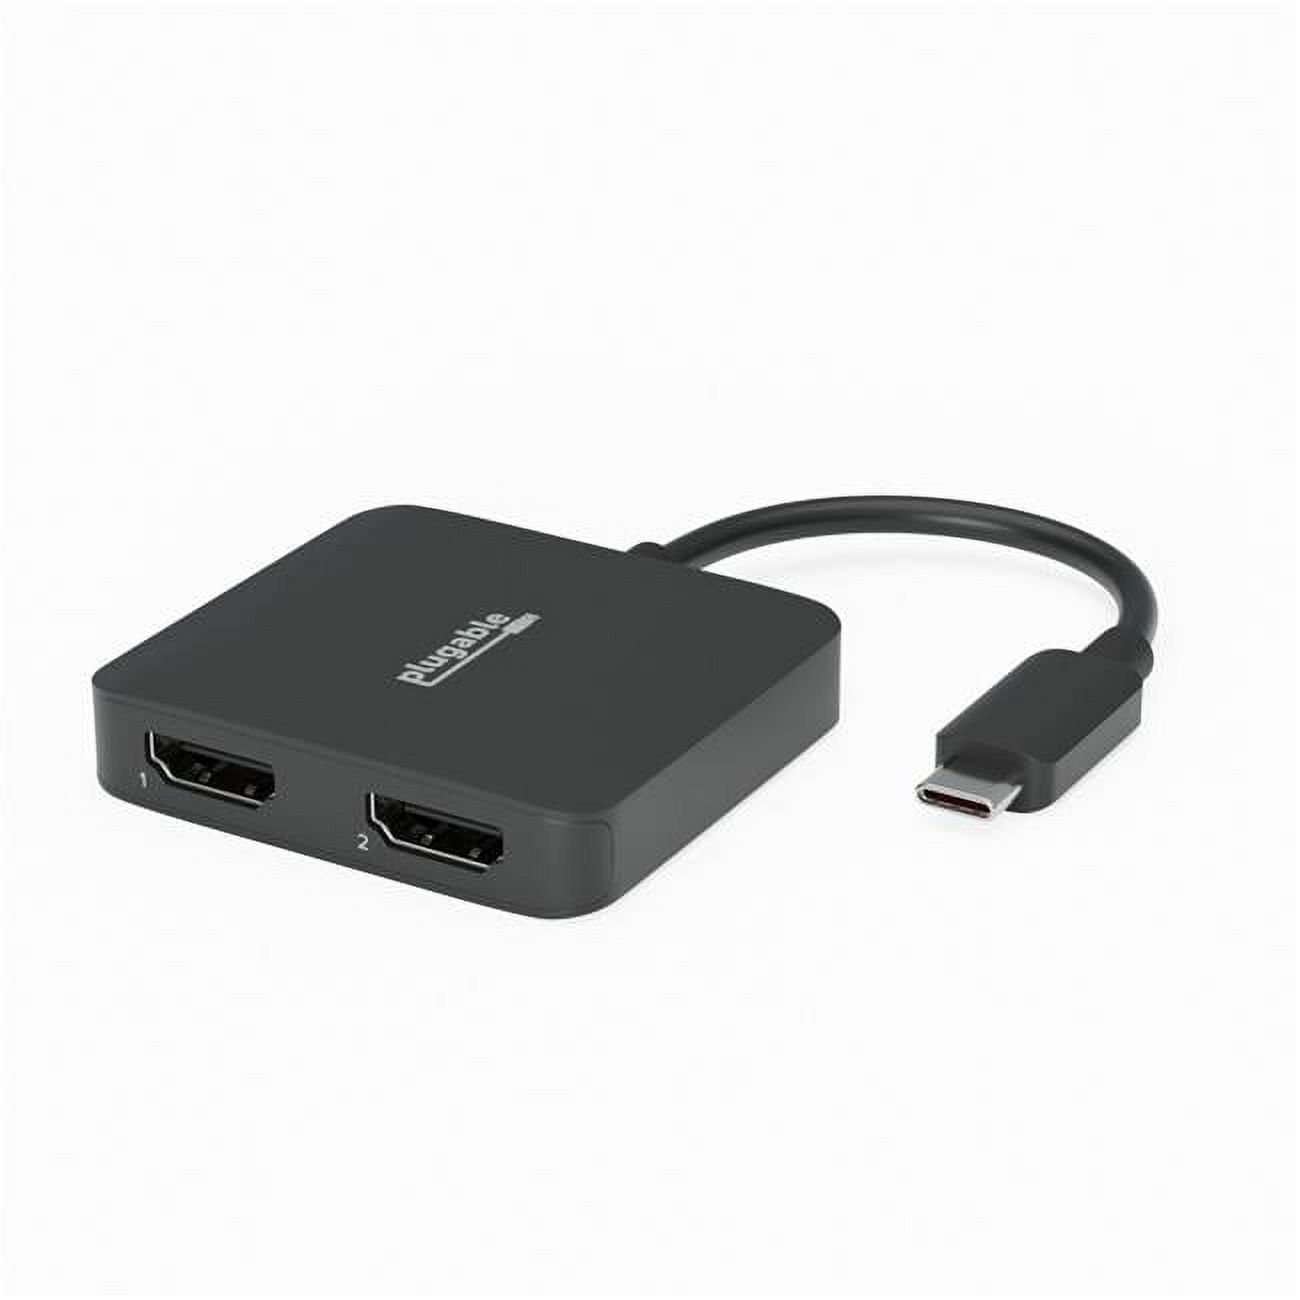 Plugable USB C to Dual HDMI Adapter, 4K HDMI Ports, for Windows and Chromebook, Driverless - image 1 of 9